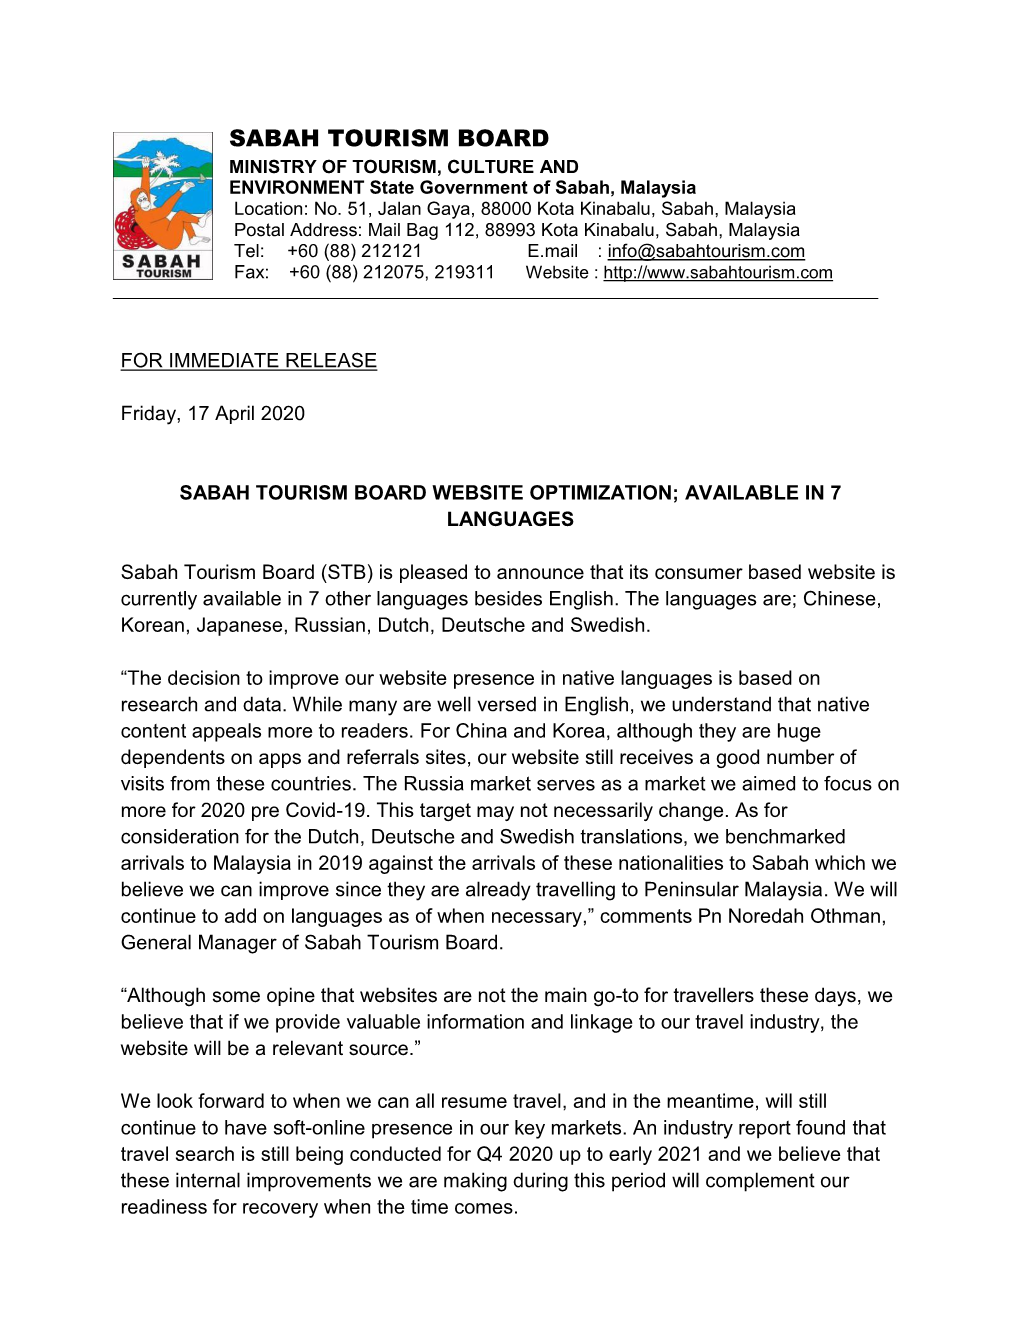 SABAH TOURISM BOARD MINISTRY of TOURISM, CULTURE and ENVIRONMENT State Government of Sabah, Malaysia Location: No